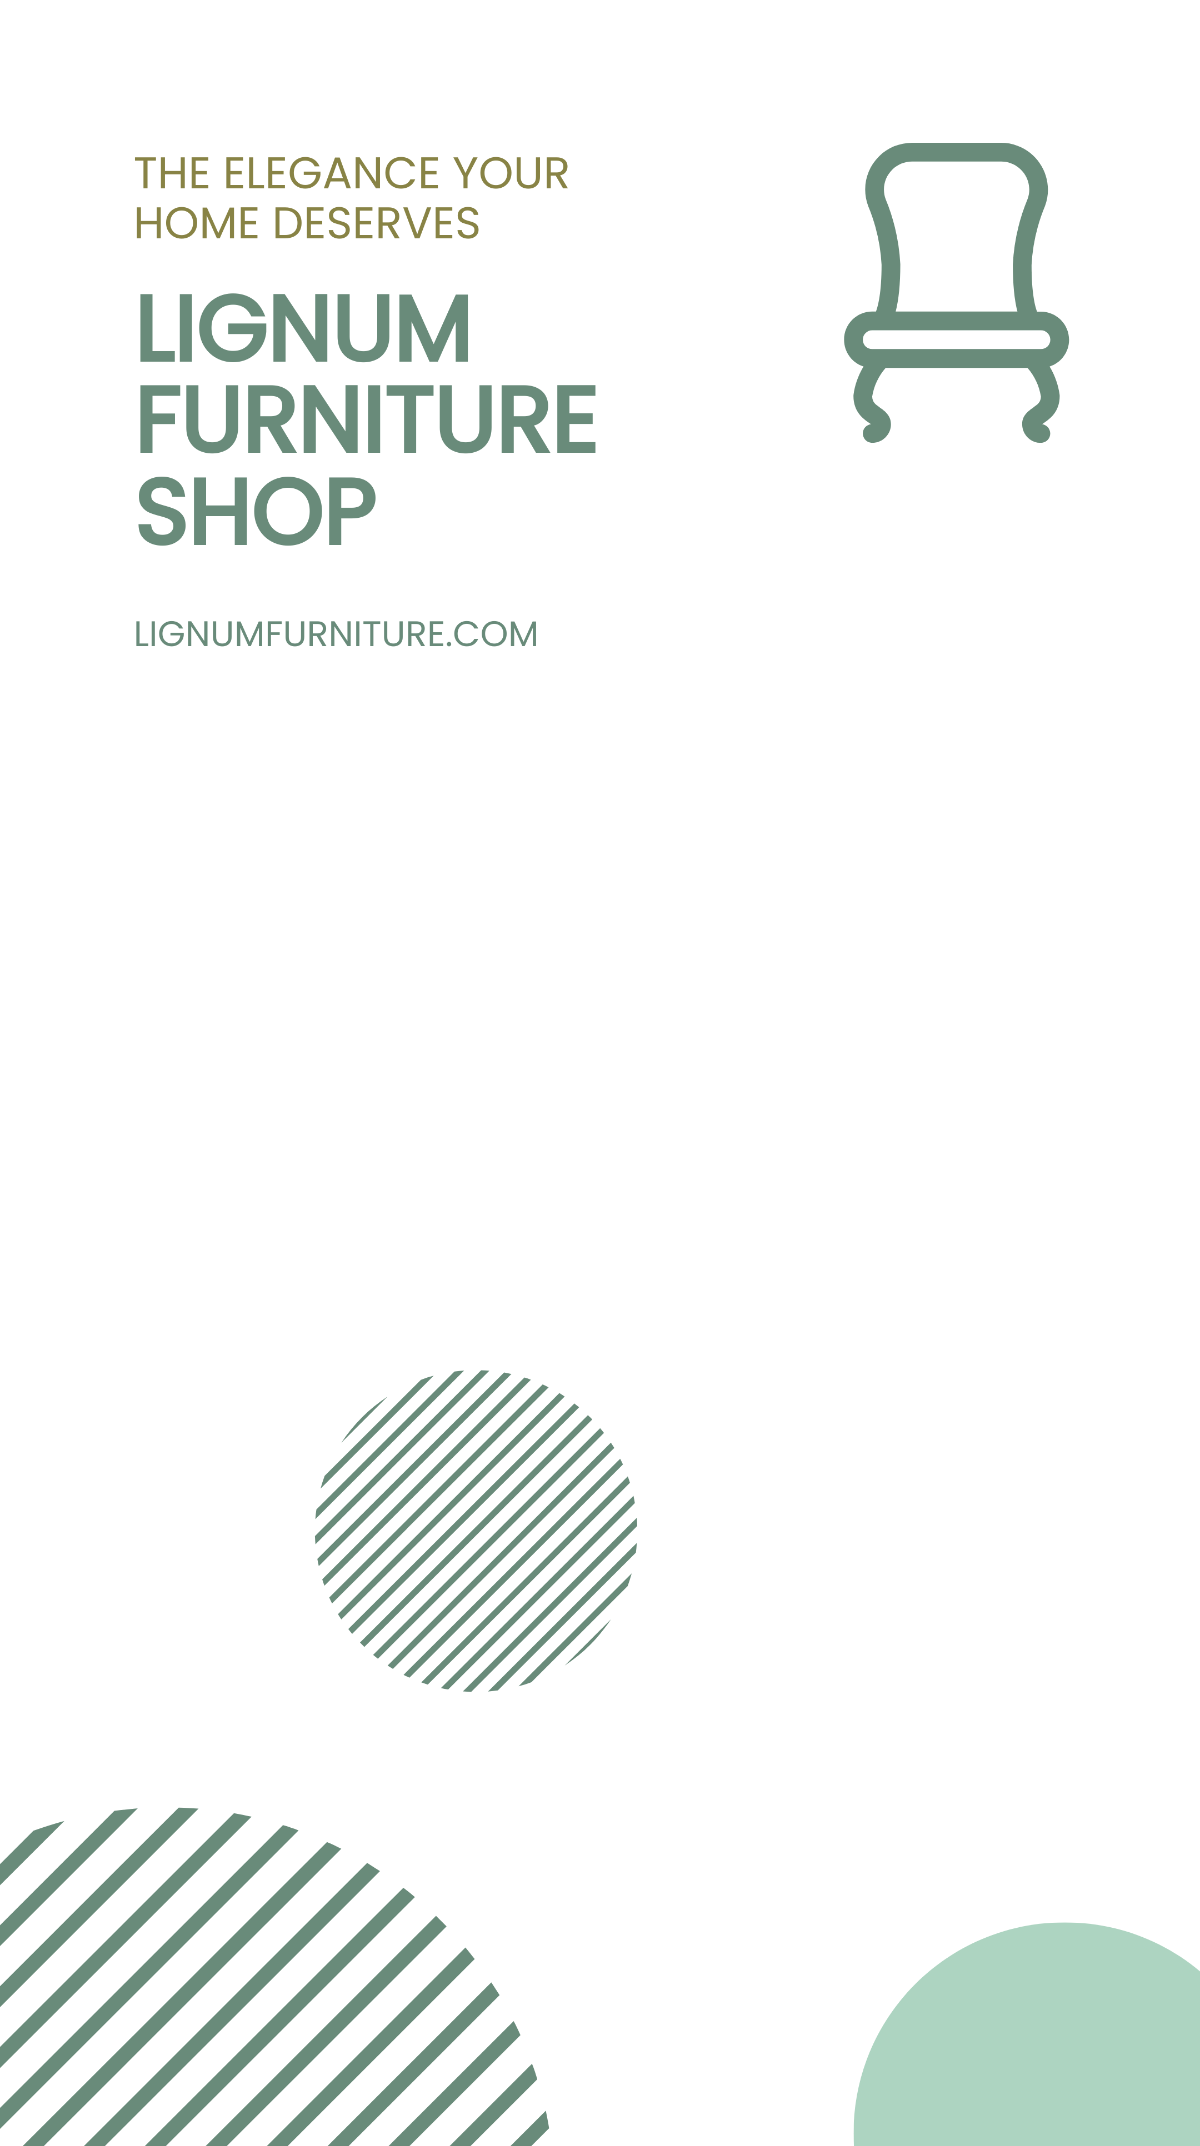 Free Furniture Shop Snapchat Geofilter Template